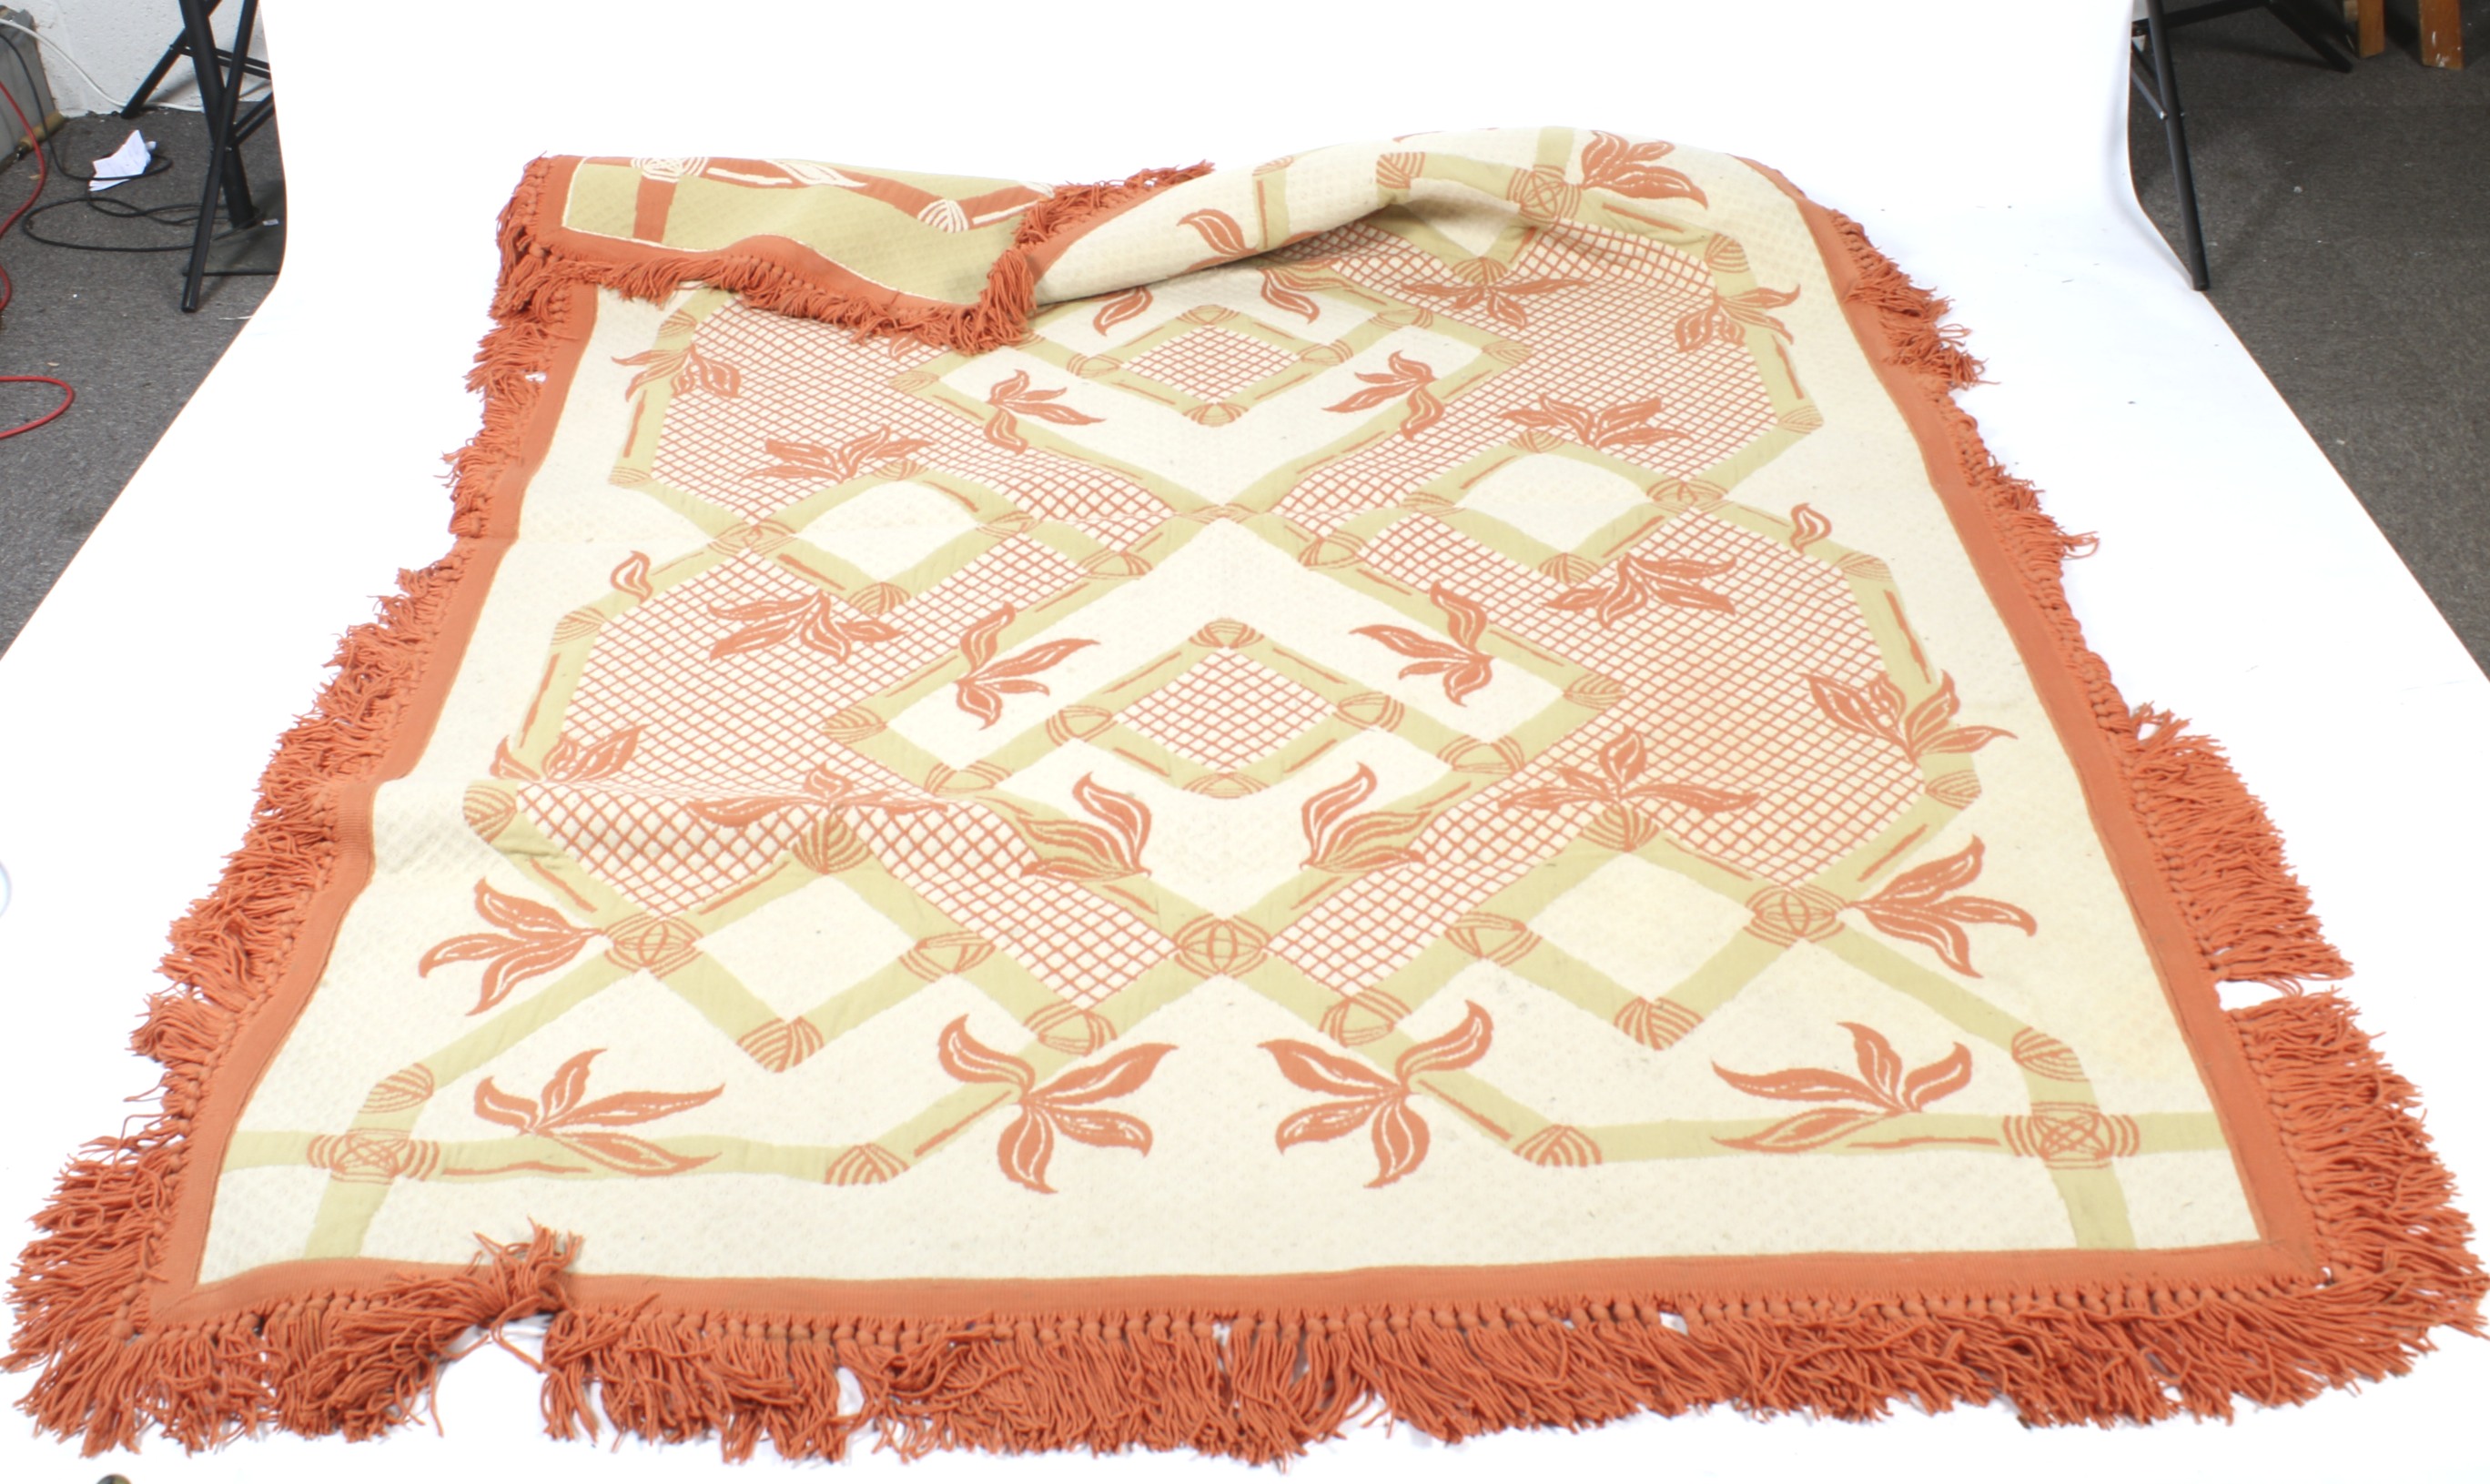 A contemporary yellow and orange double side wool bedspread. With orange tassle fringe.